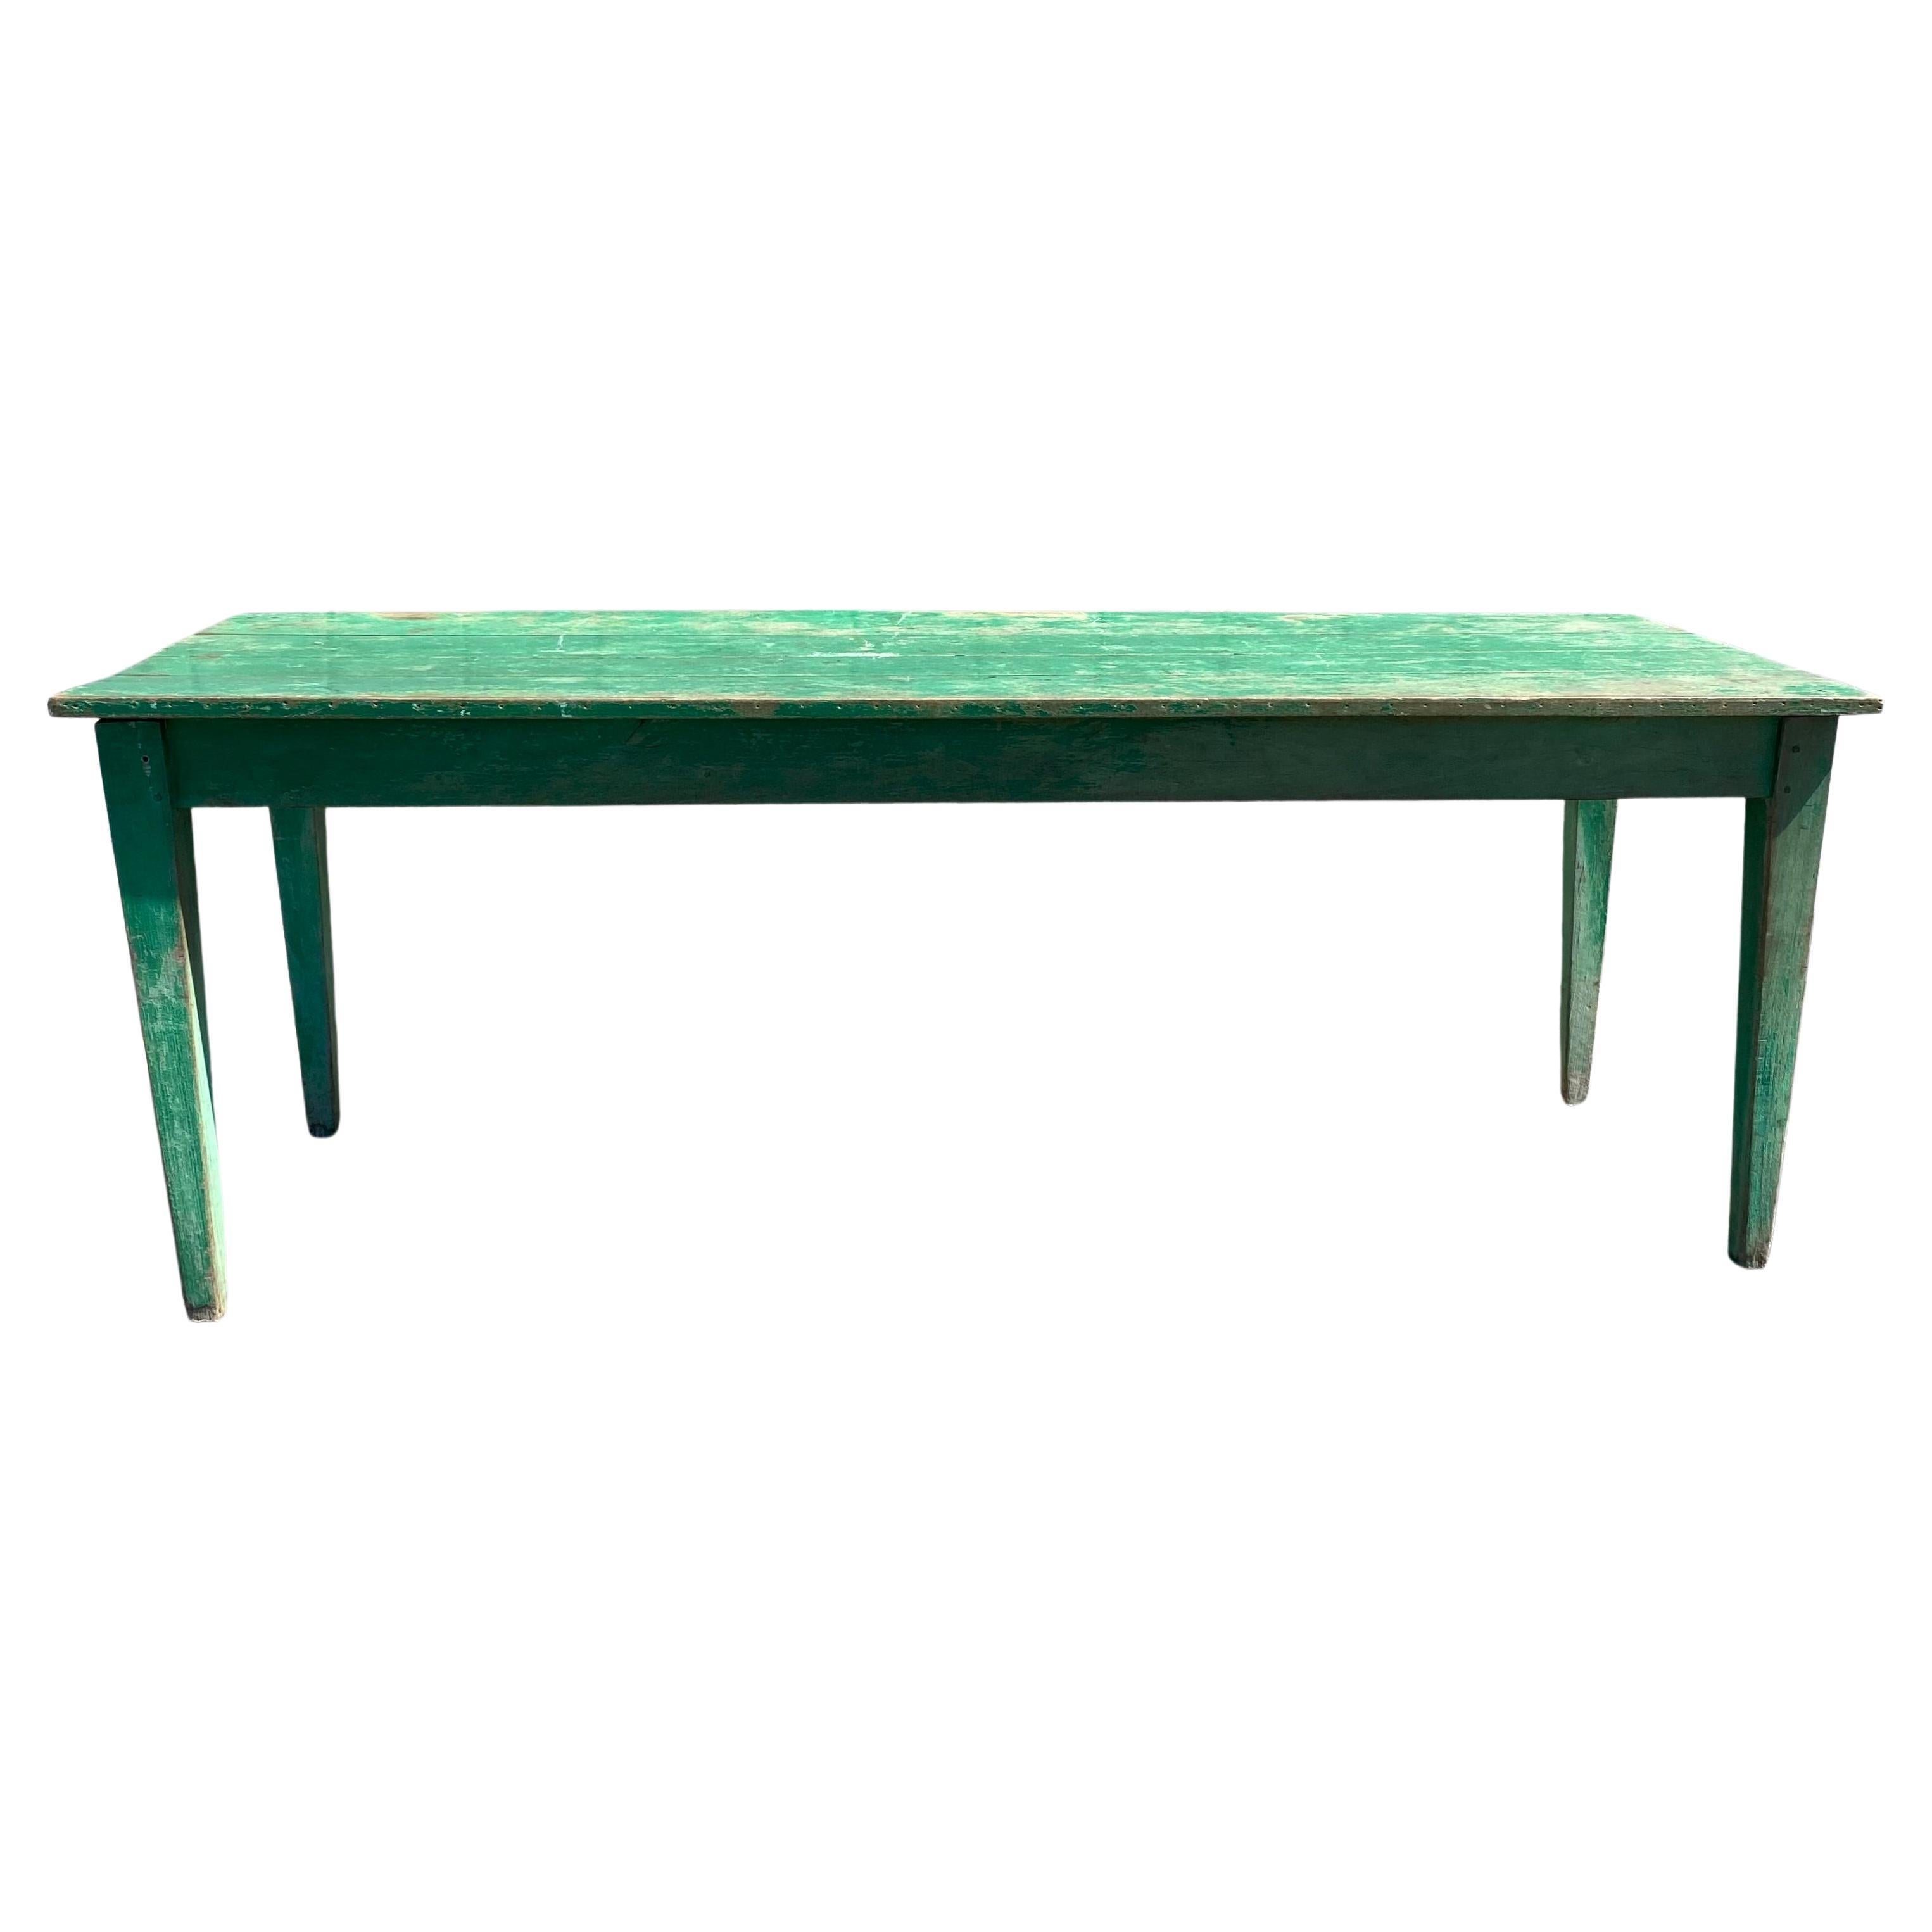 French Country Provinicial Farm Table with Original Green Paint